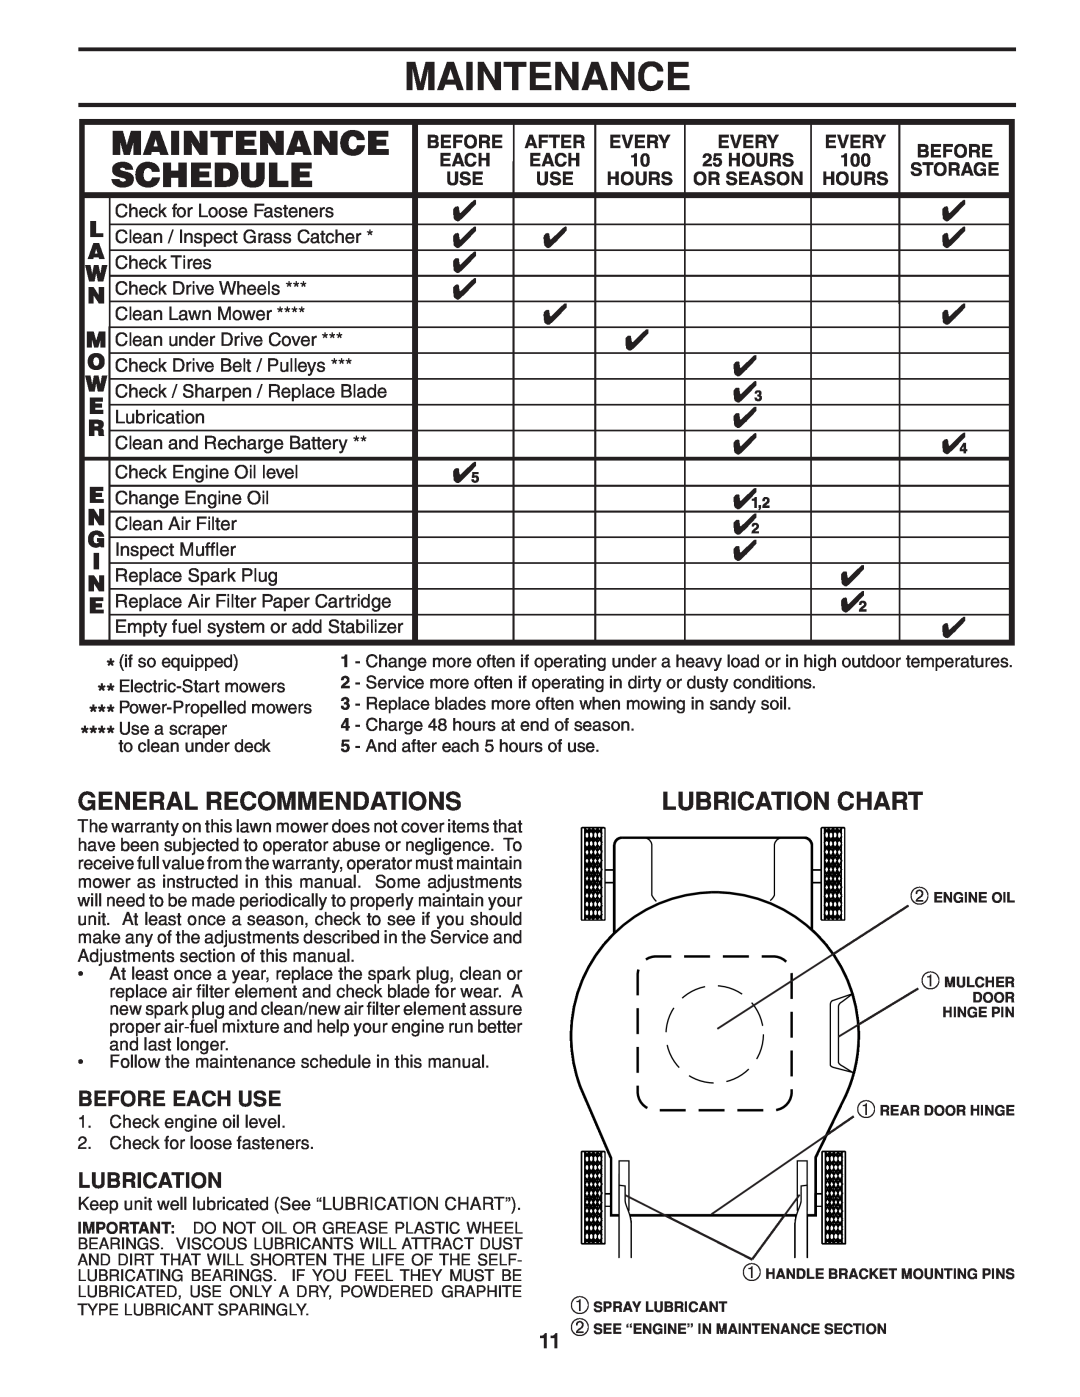 Husqvarna 961430096 warranty Maintenance, General Recommendations, Lubrication Chart, Before Each Use 